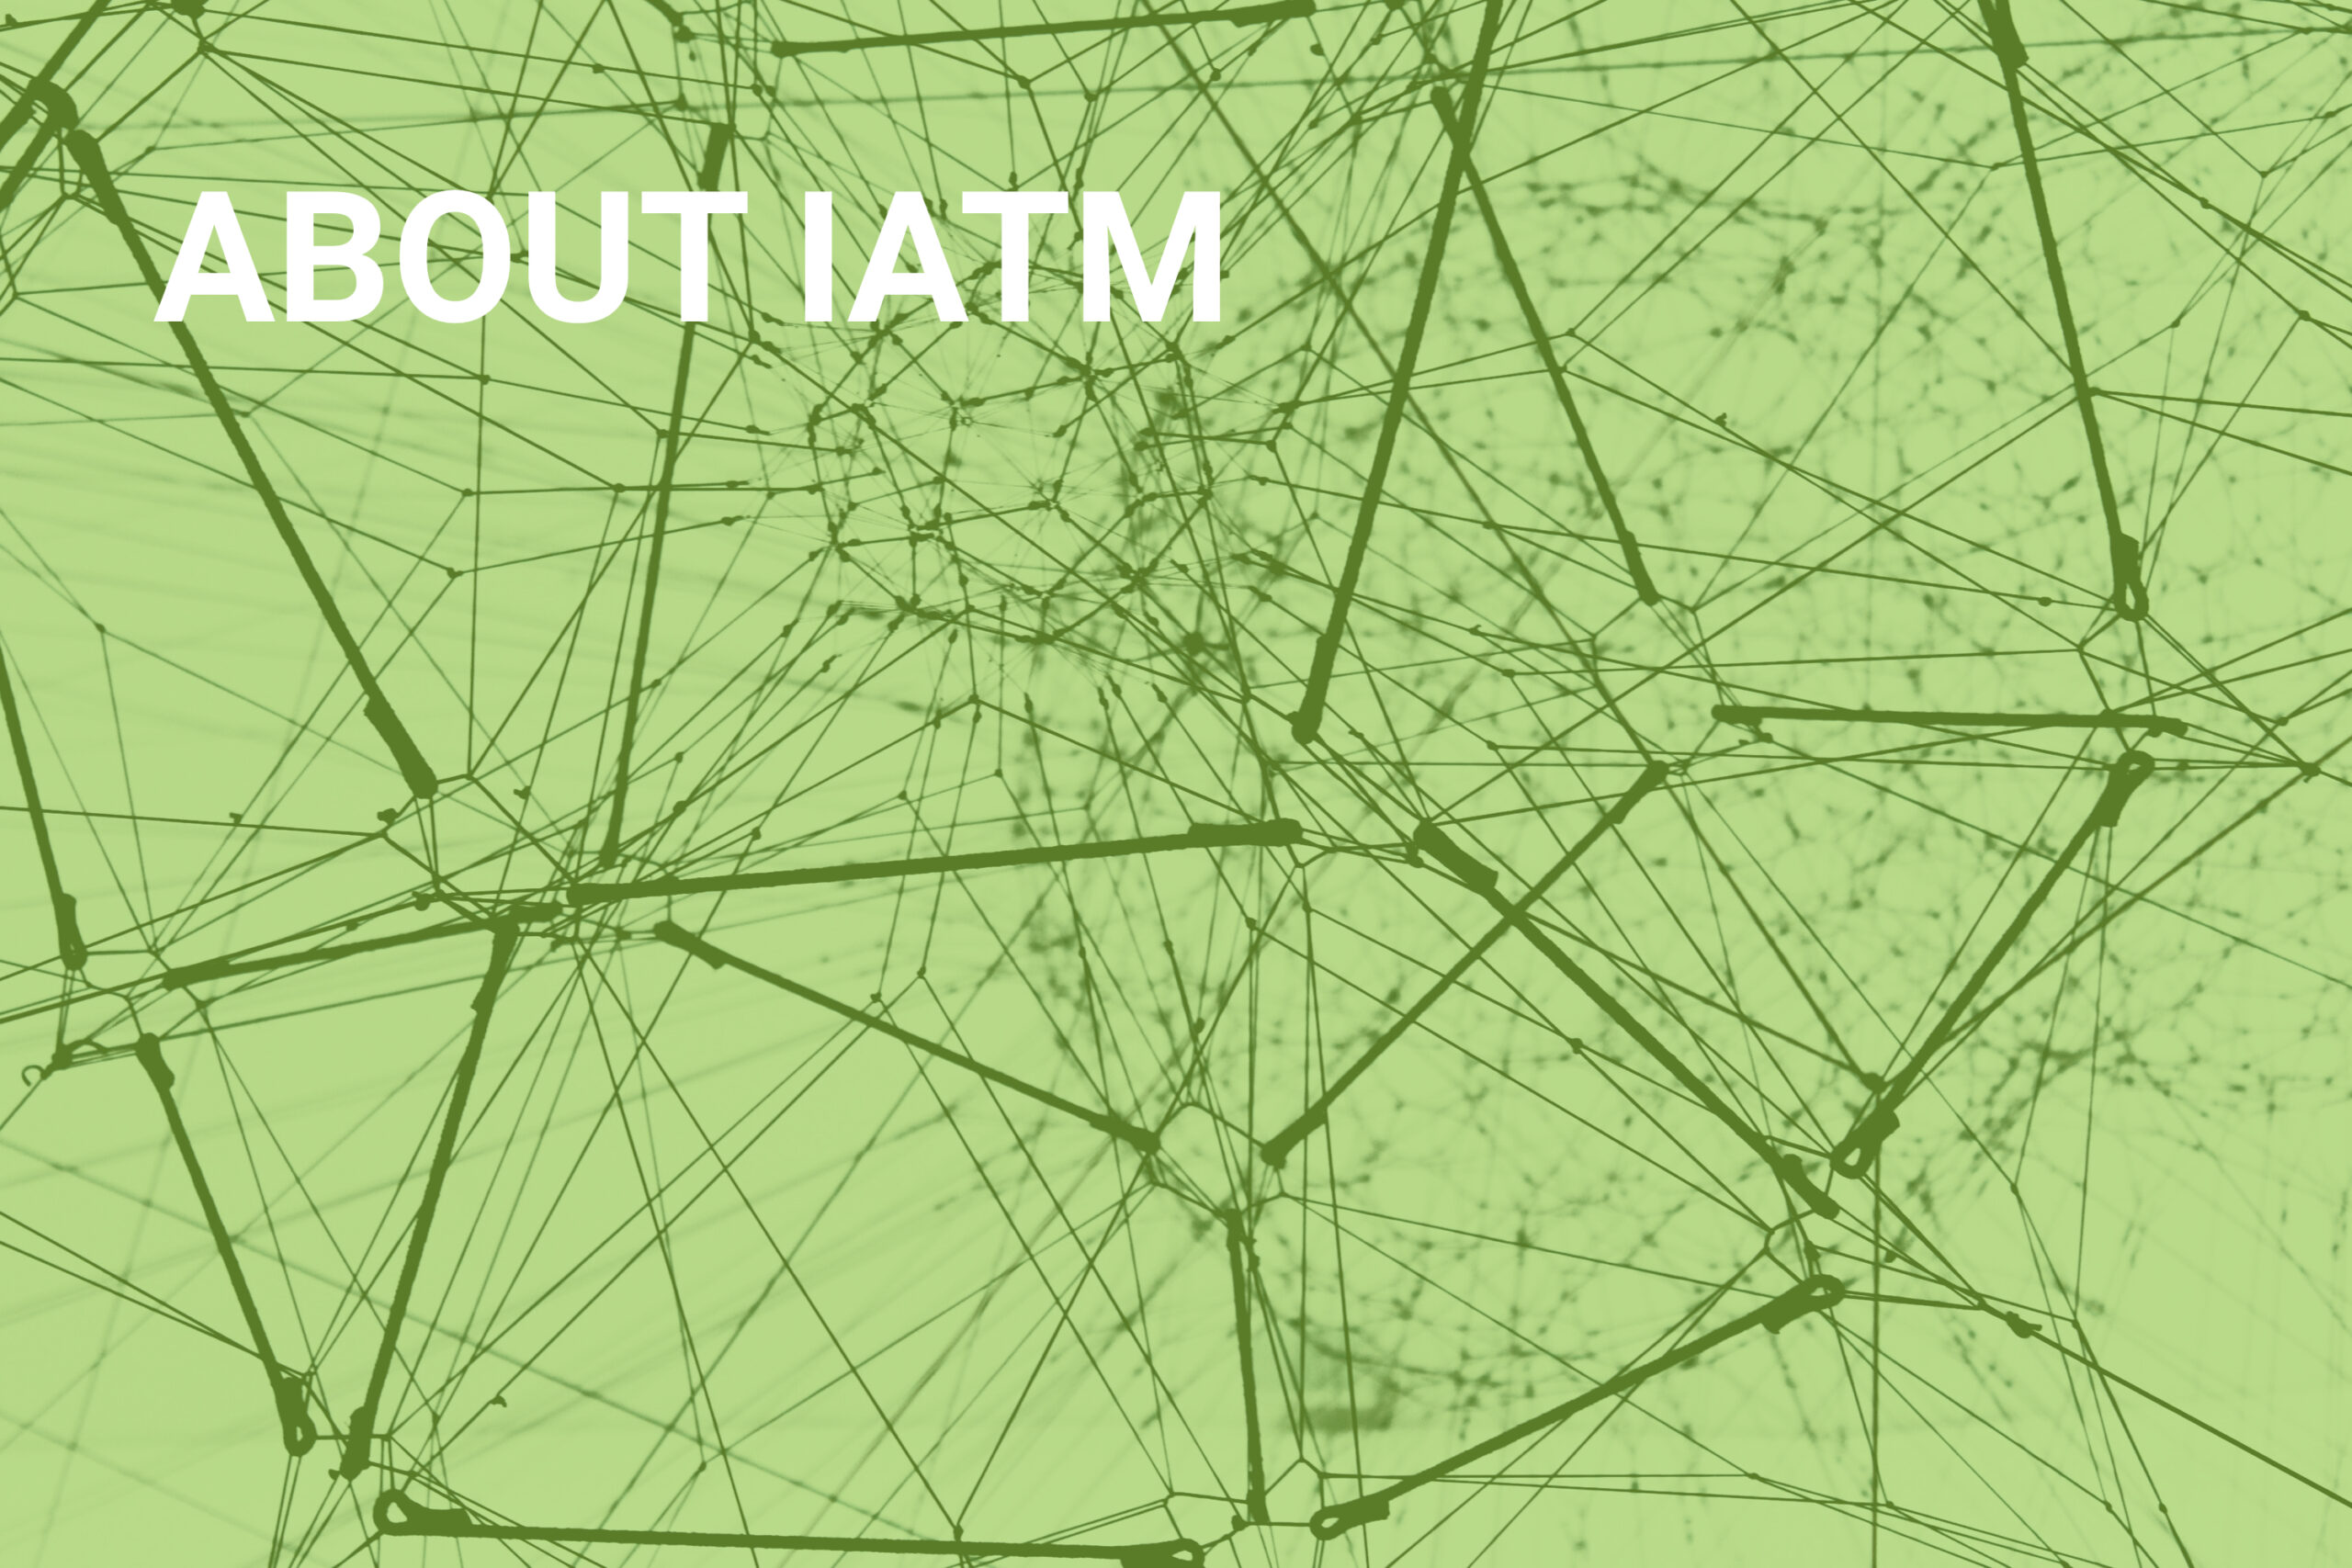 a network structure with black wires connected to one another, entire image covered by a slightly transparent green screen text in the top left corner: About IATM